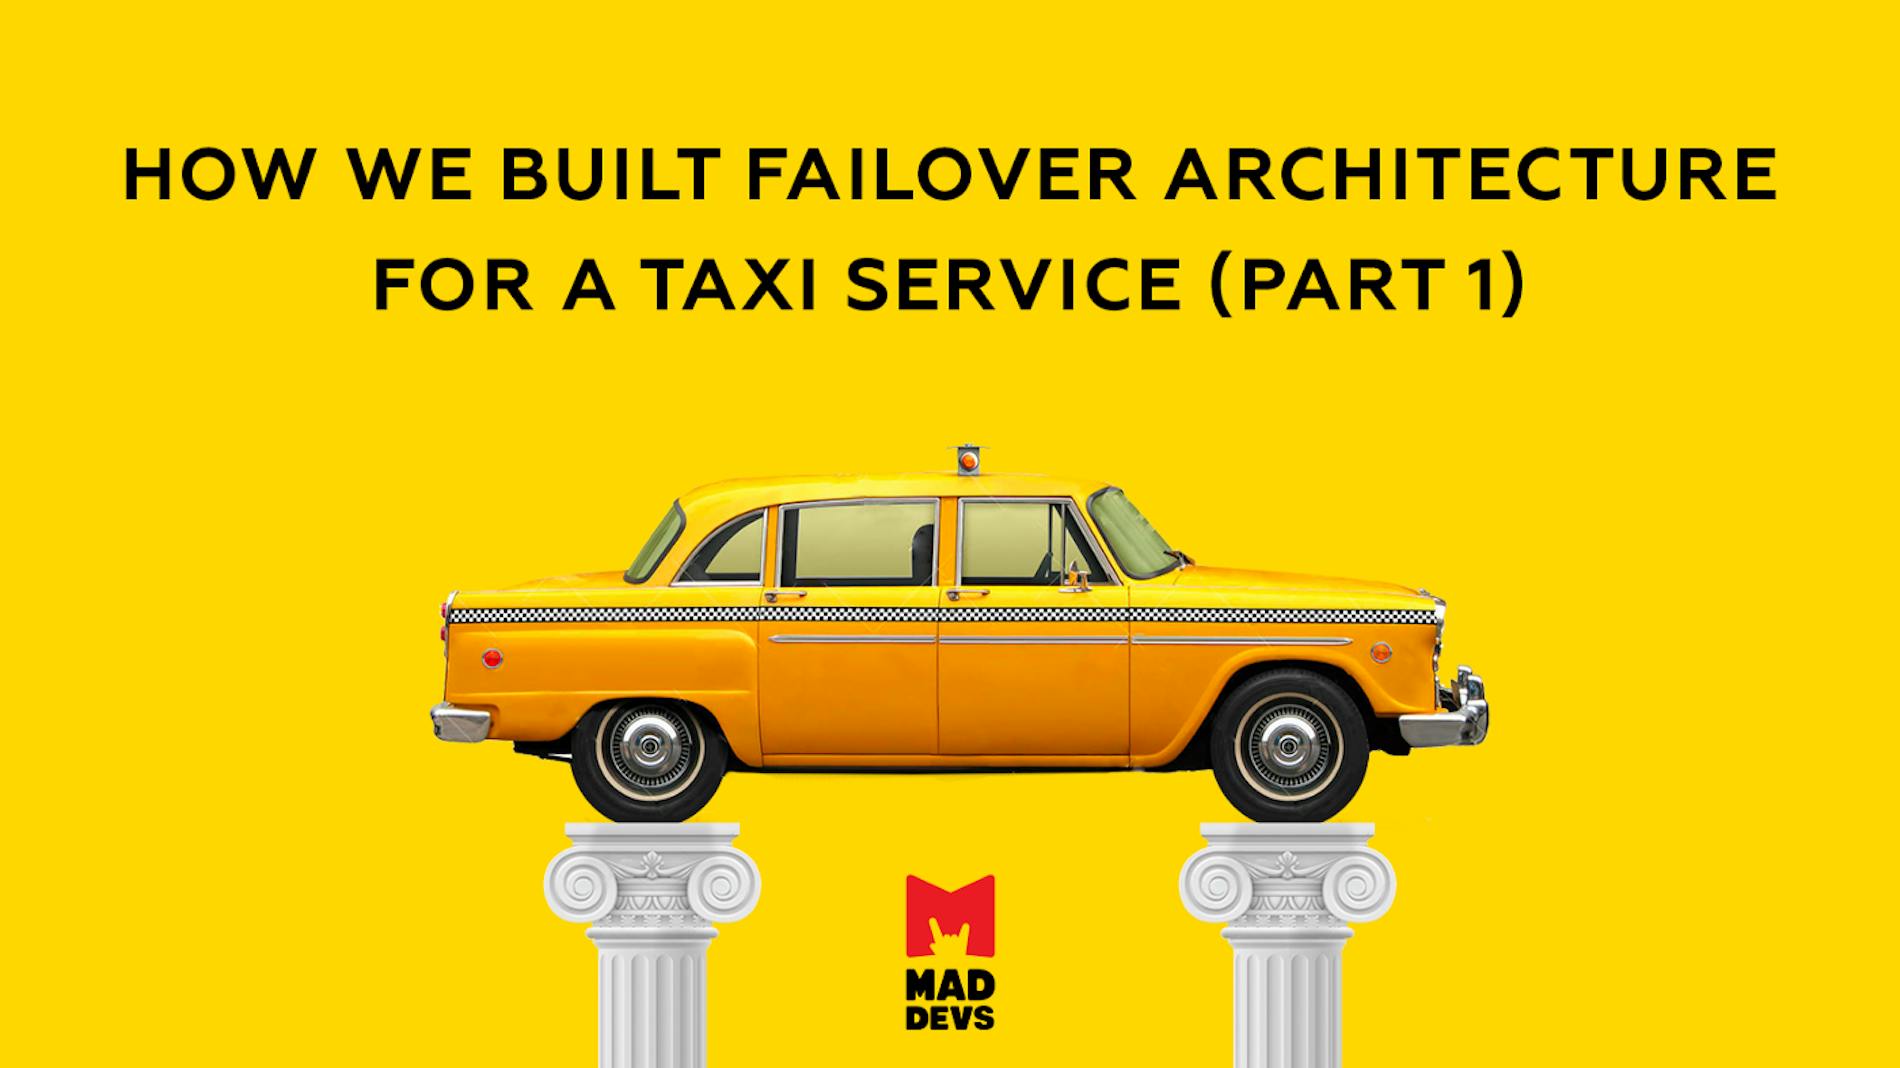 How We Built Failover Architecture for a Taxi Service - Part 1